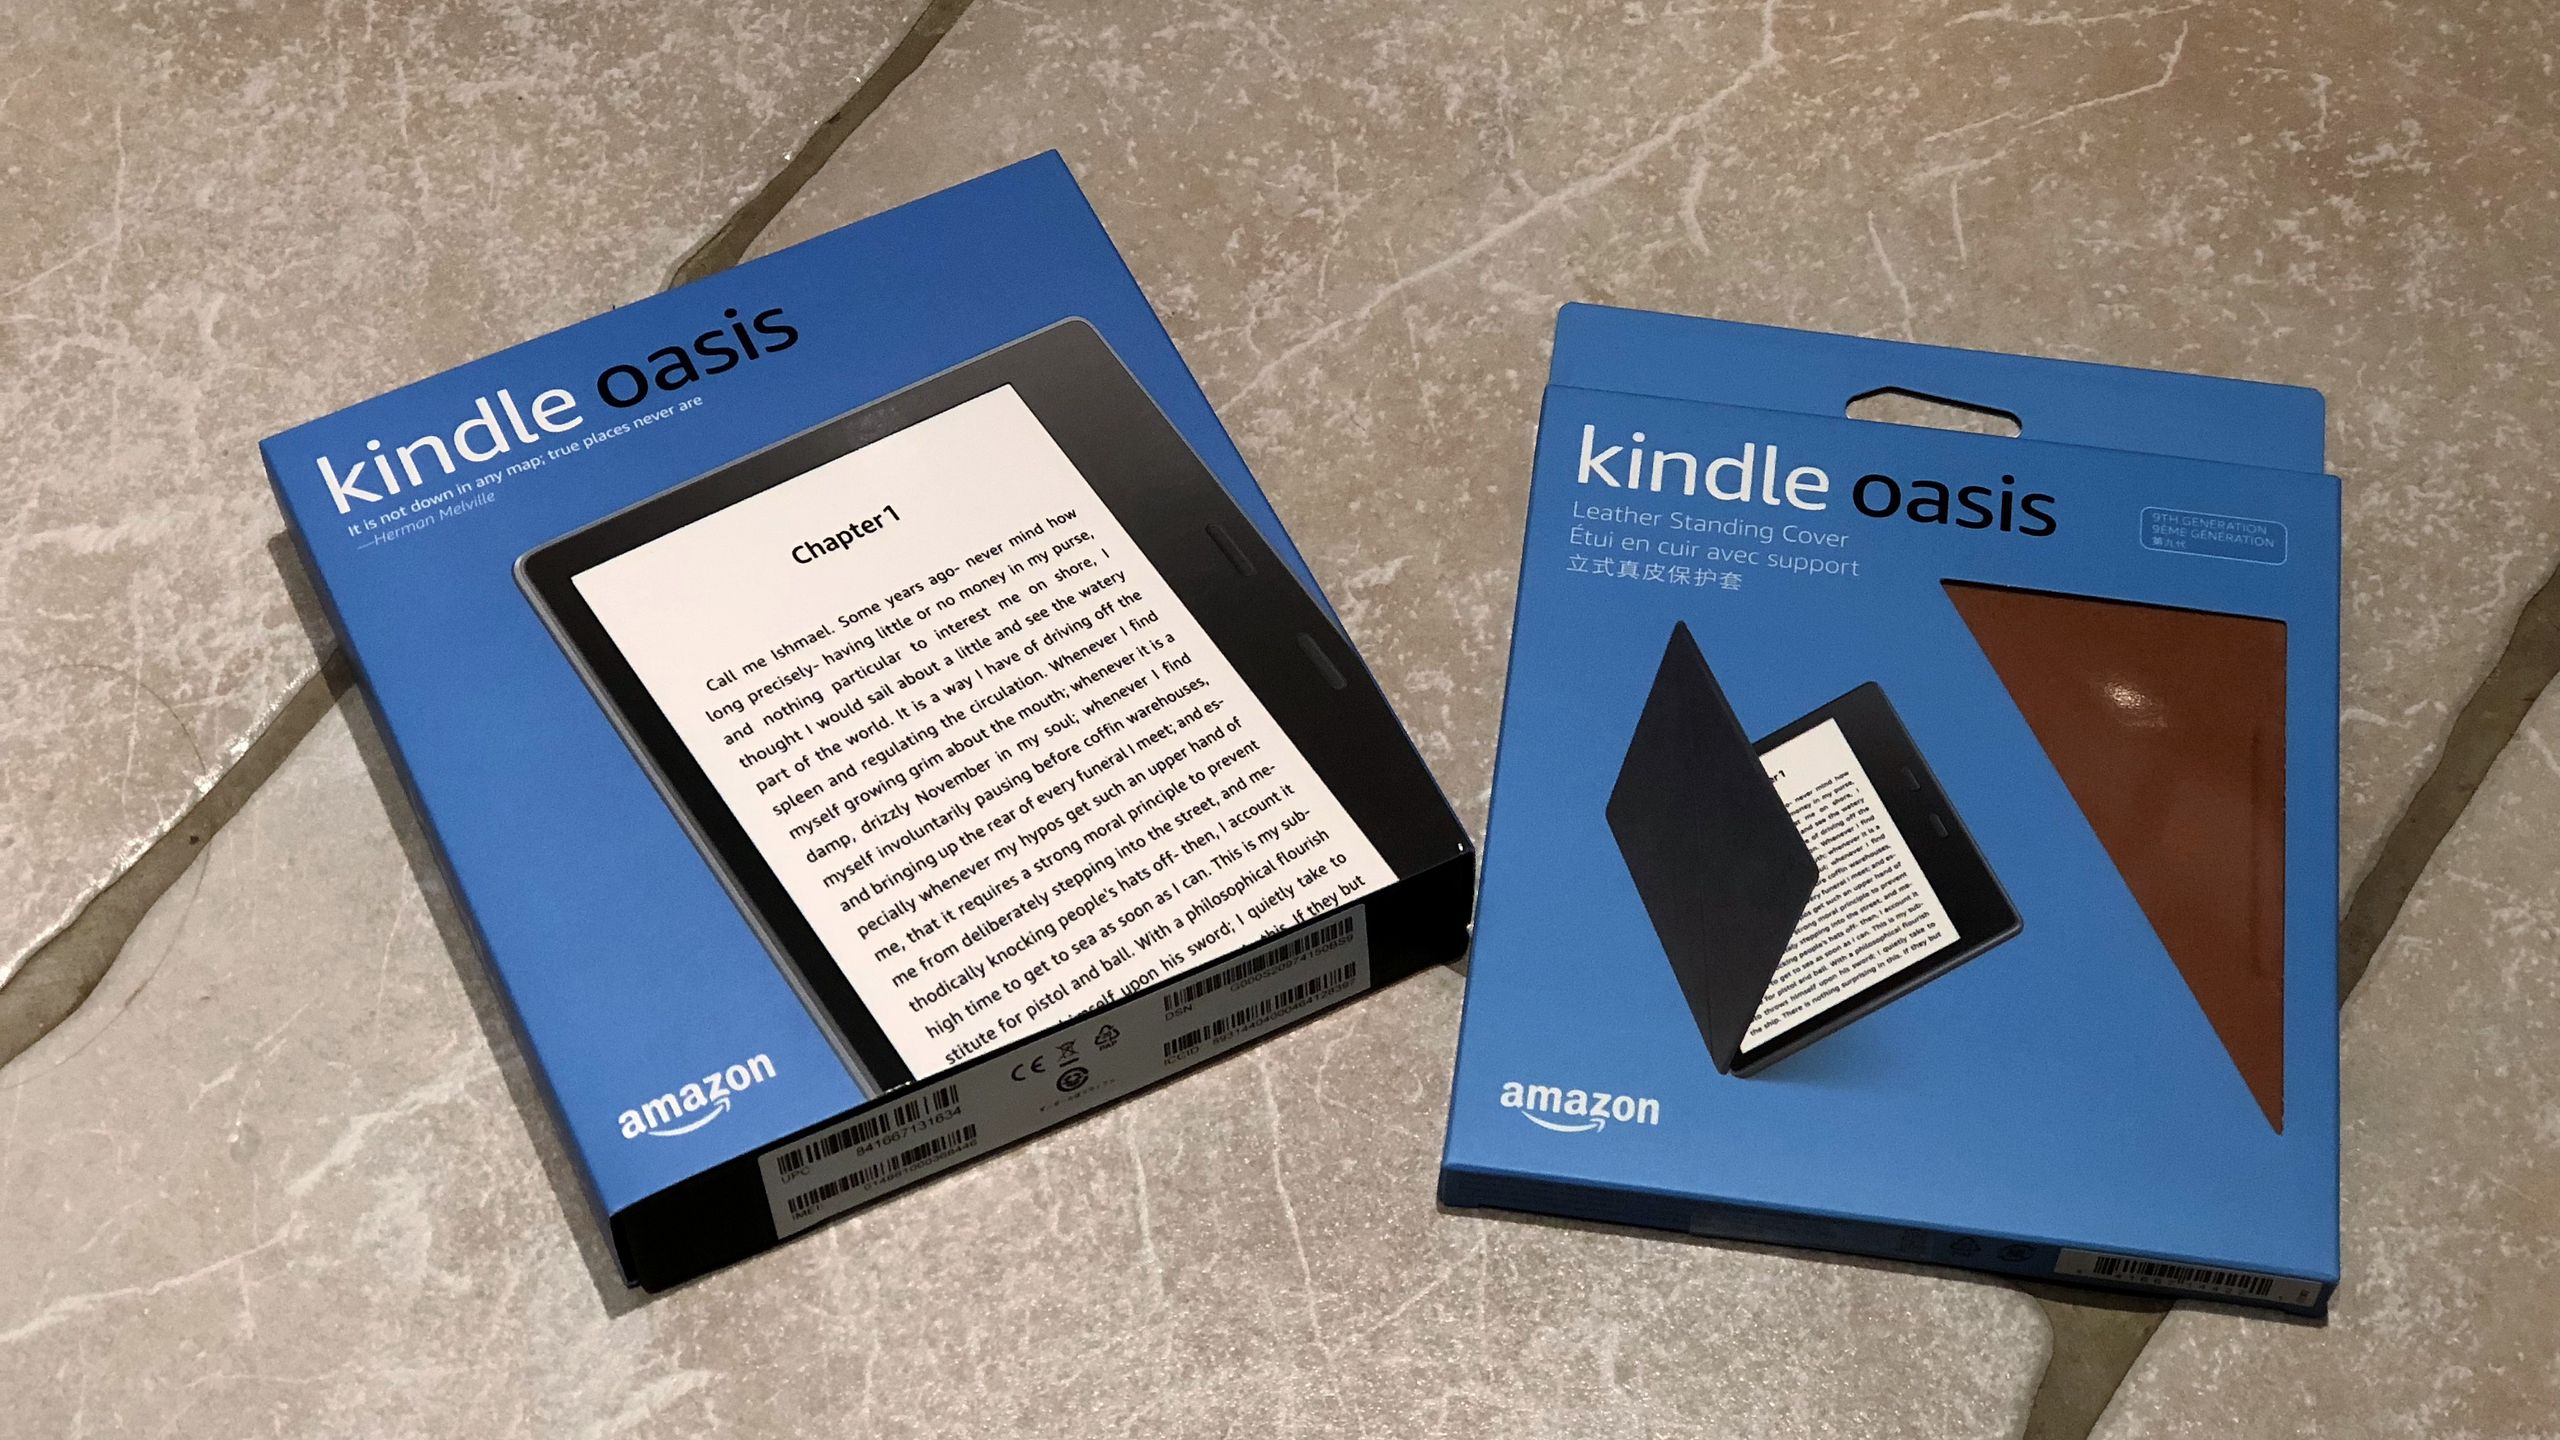 Amazon Kindle Oasis review still lovely, now with a larger 7inch